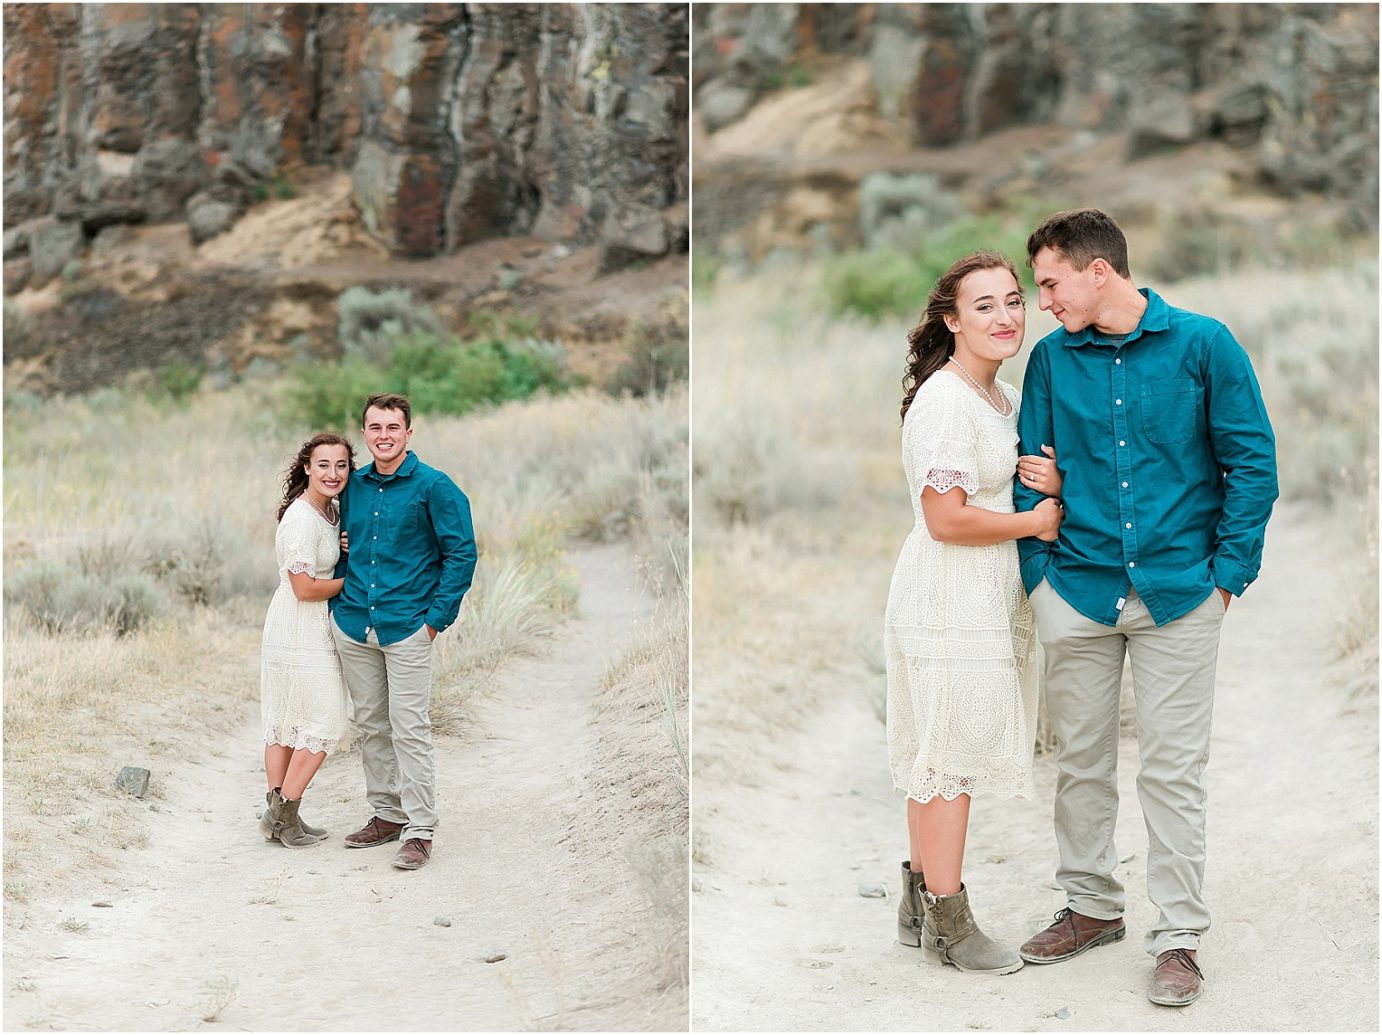 Desert Engagement Session Central WA Regan and Lindsey on path